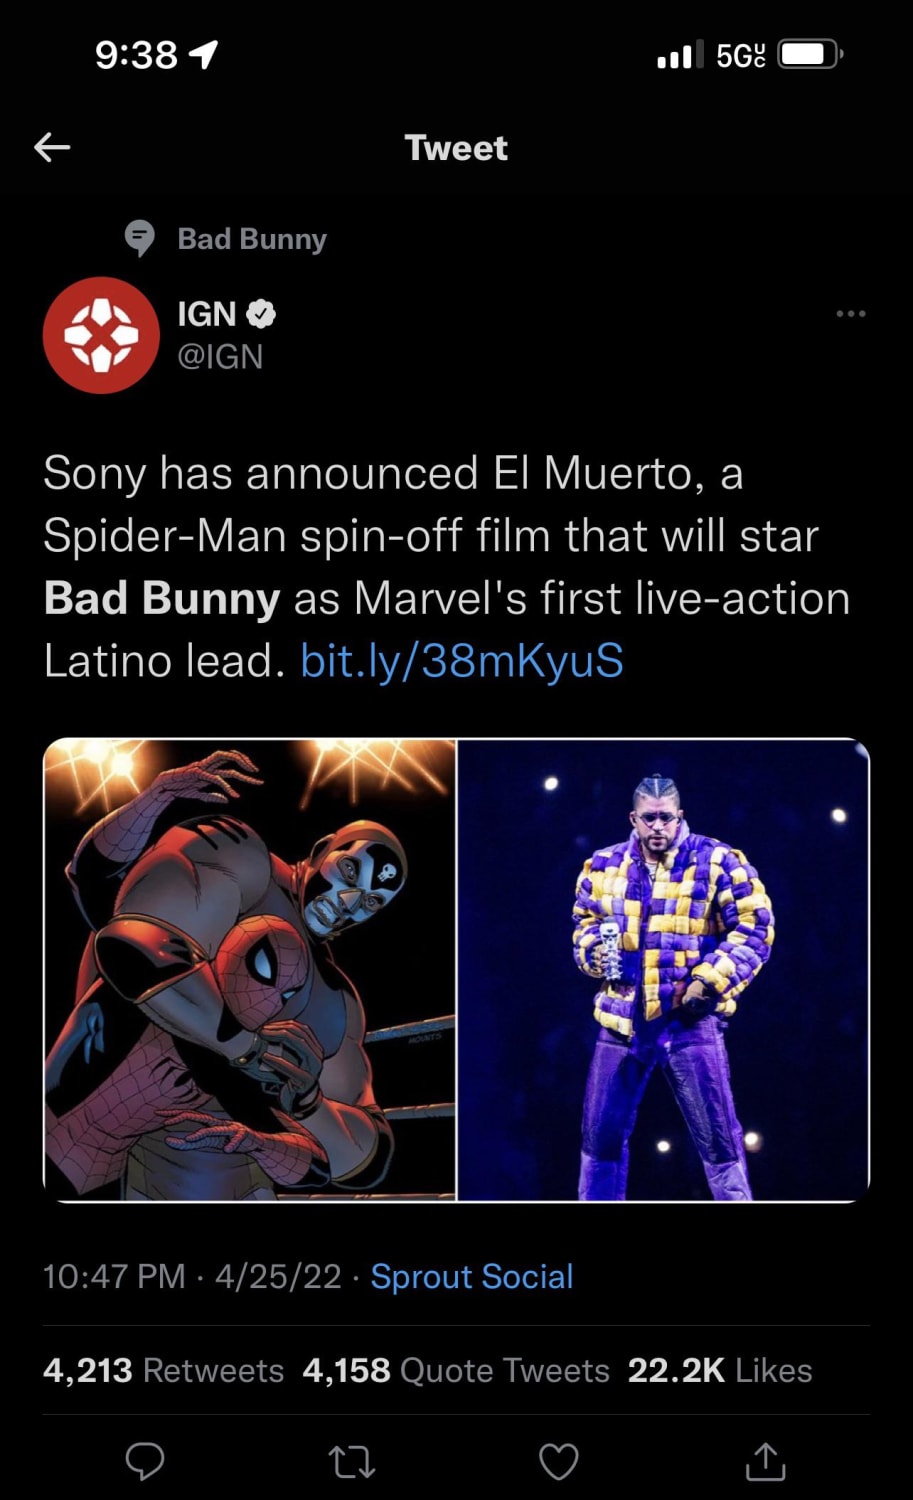 I’m so sure Sony only chose this character because Bad Bunny is a part time wrestler for WWE, so they looked for a Latino wrestler. Am I the only ones who thinks that is the only reason they would choose such a minor character?